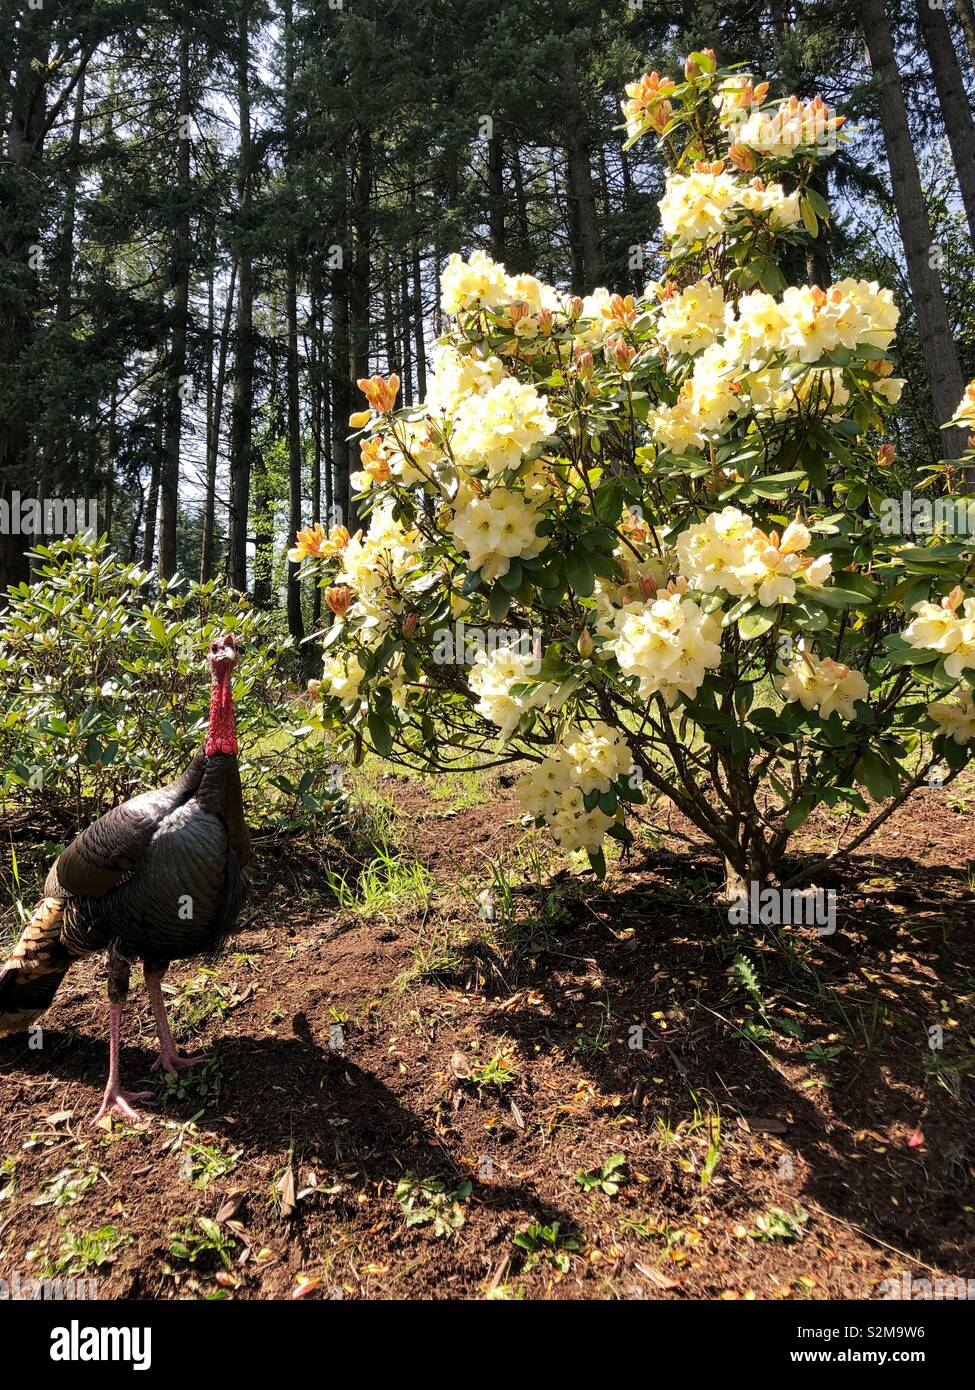 A wild turkey standing next to a rhododendron bush in Eugene, Oregon, USA. Stock Photo